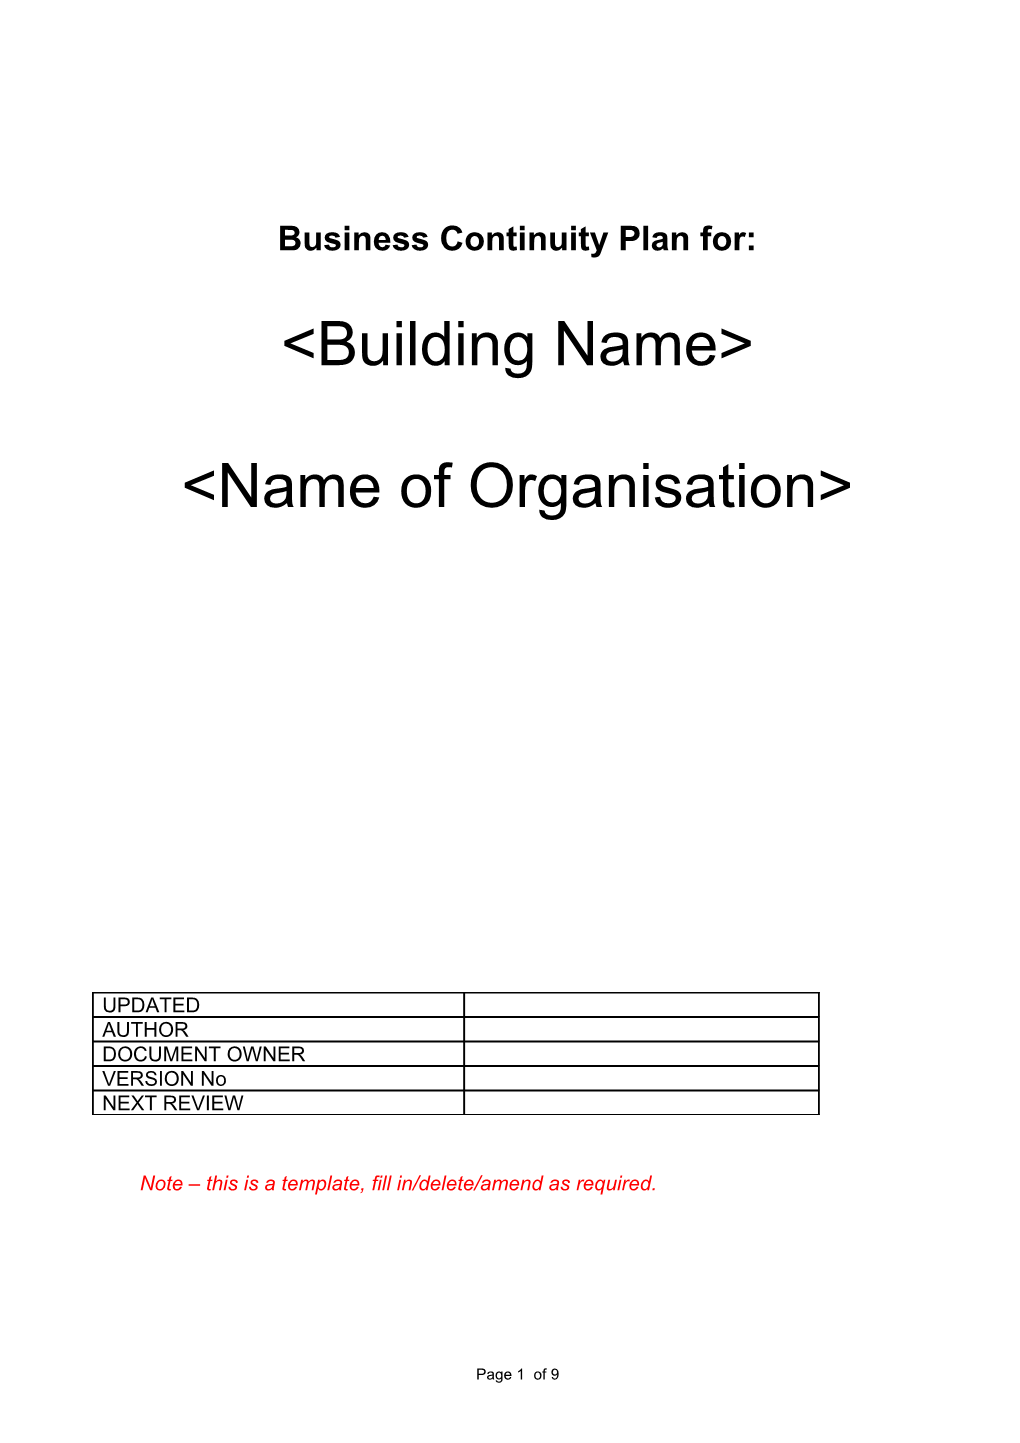 Business Continuity Plan For